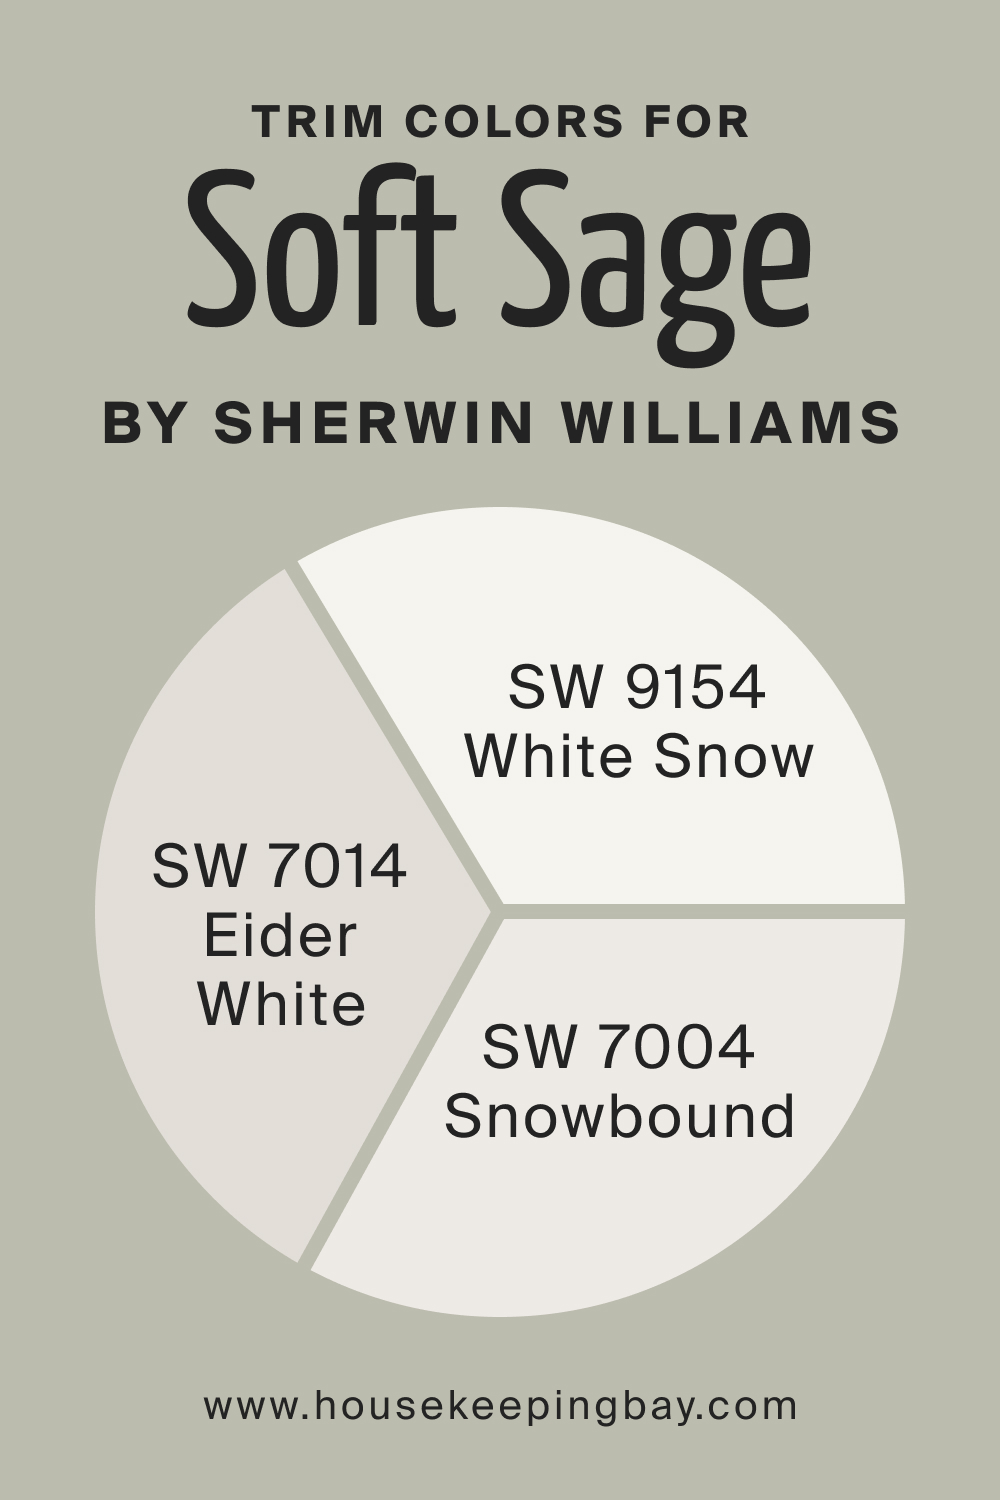 Trim Colors of SW 9647 Soft Sage by Sherwin Williams